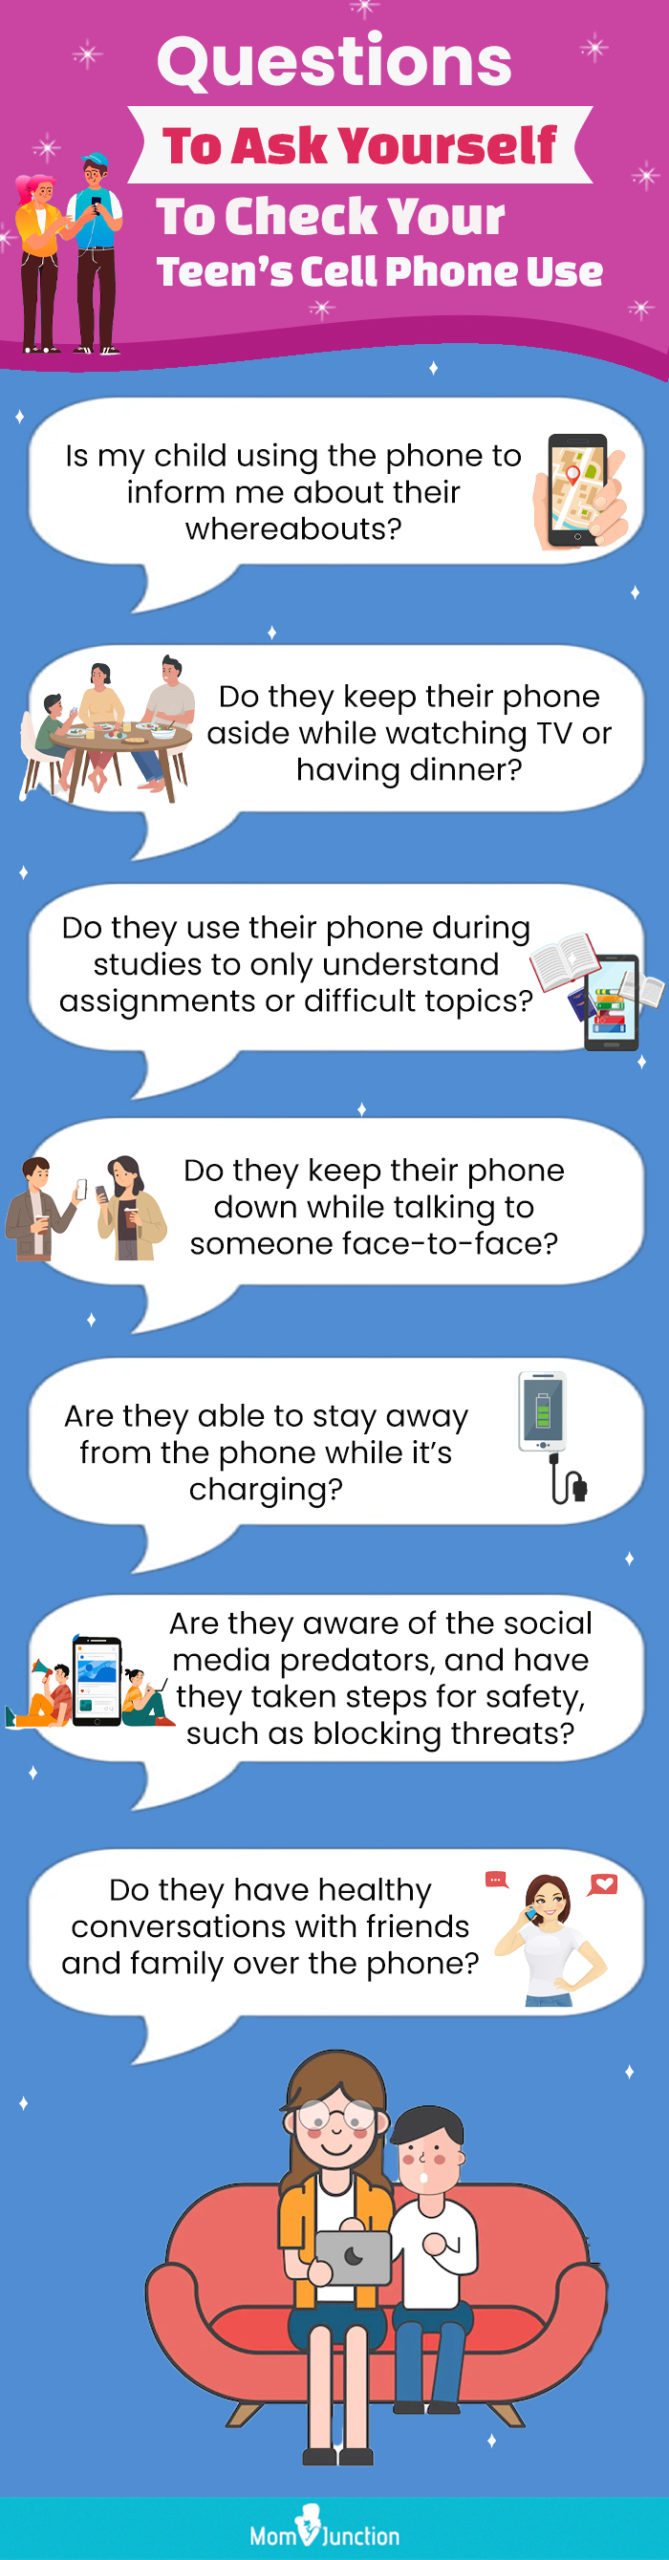 questions to ask yourself to check your teens cell phone use (infographic)